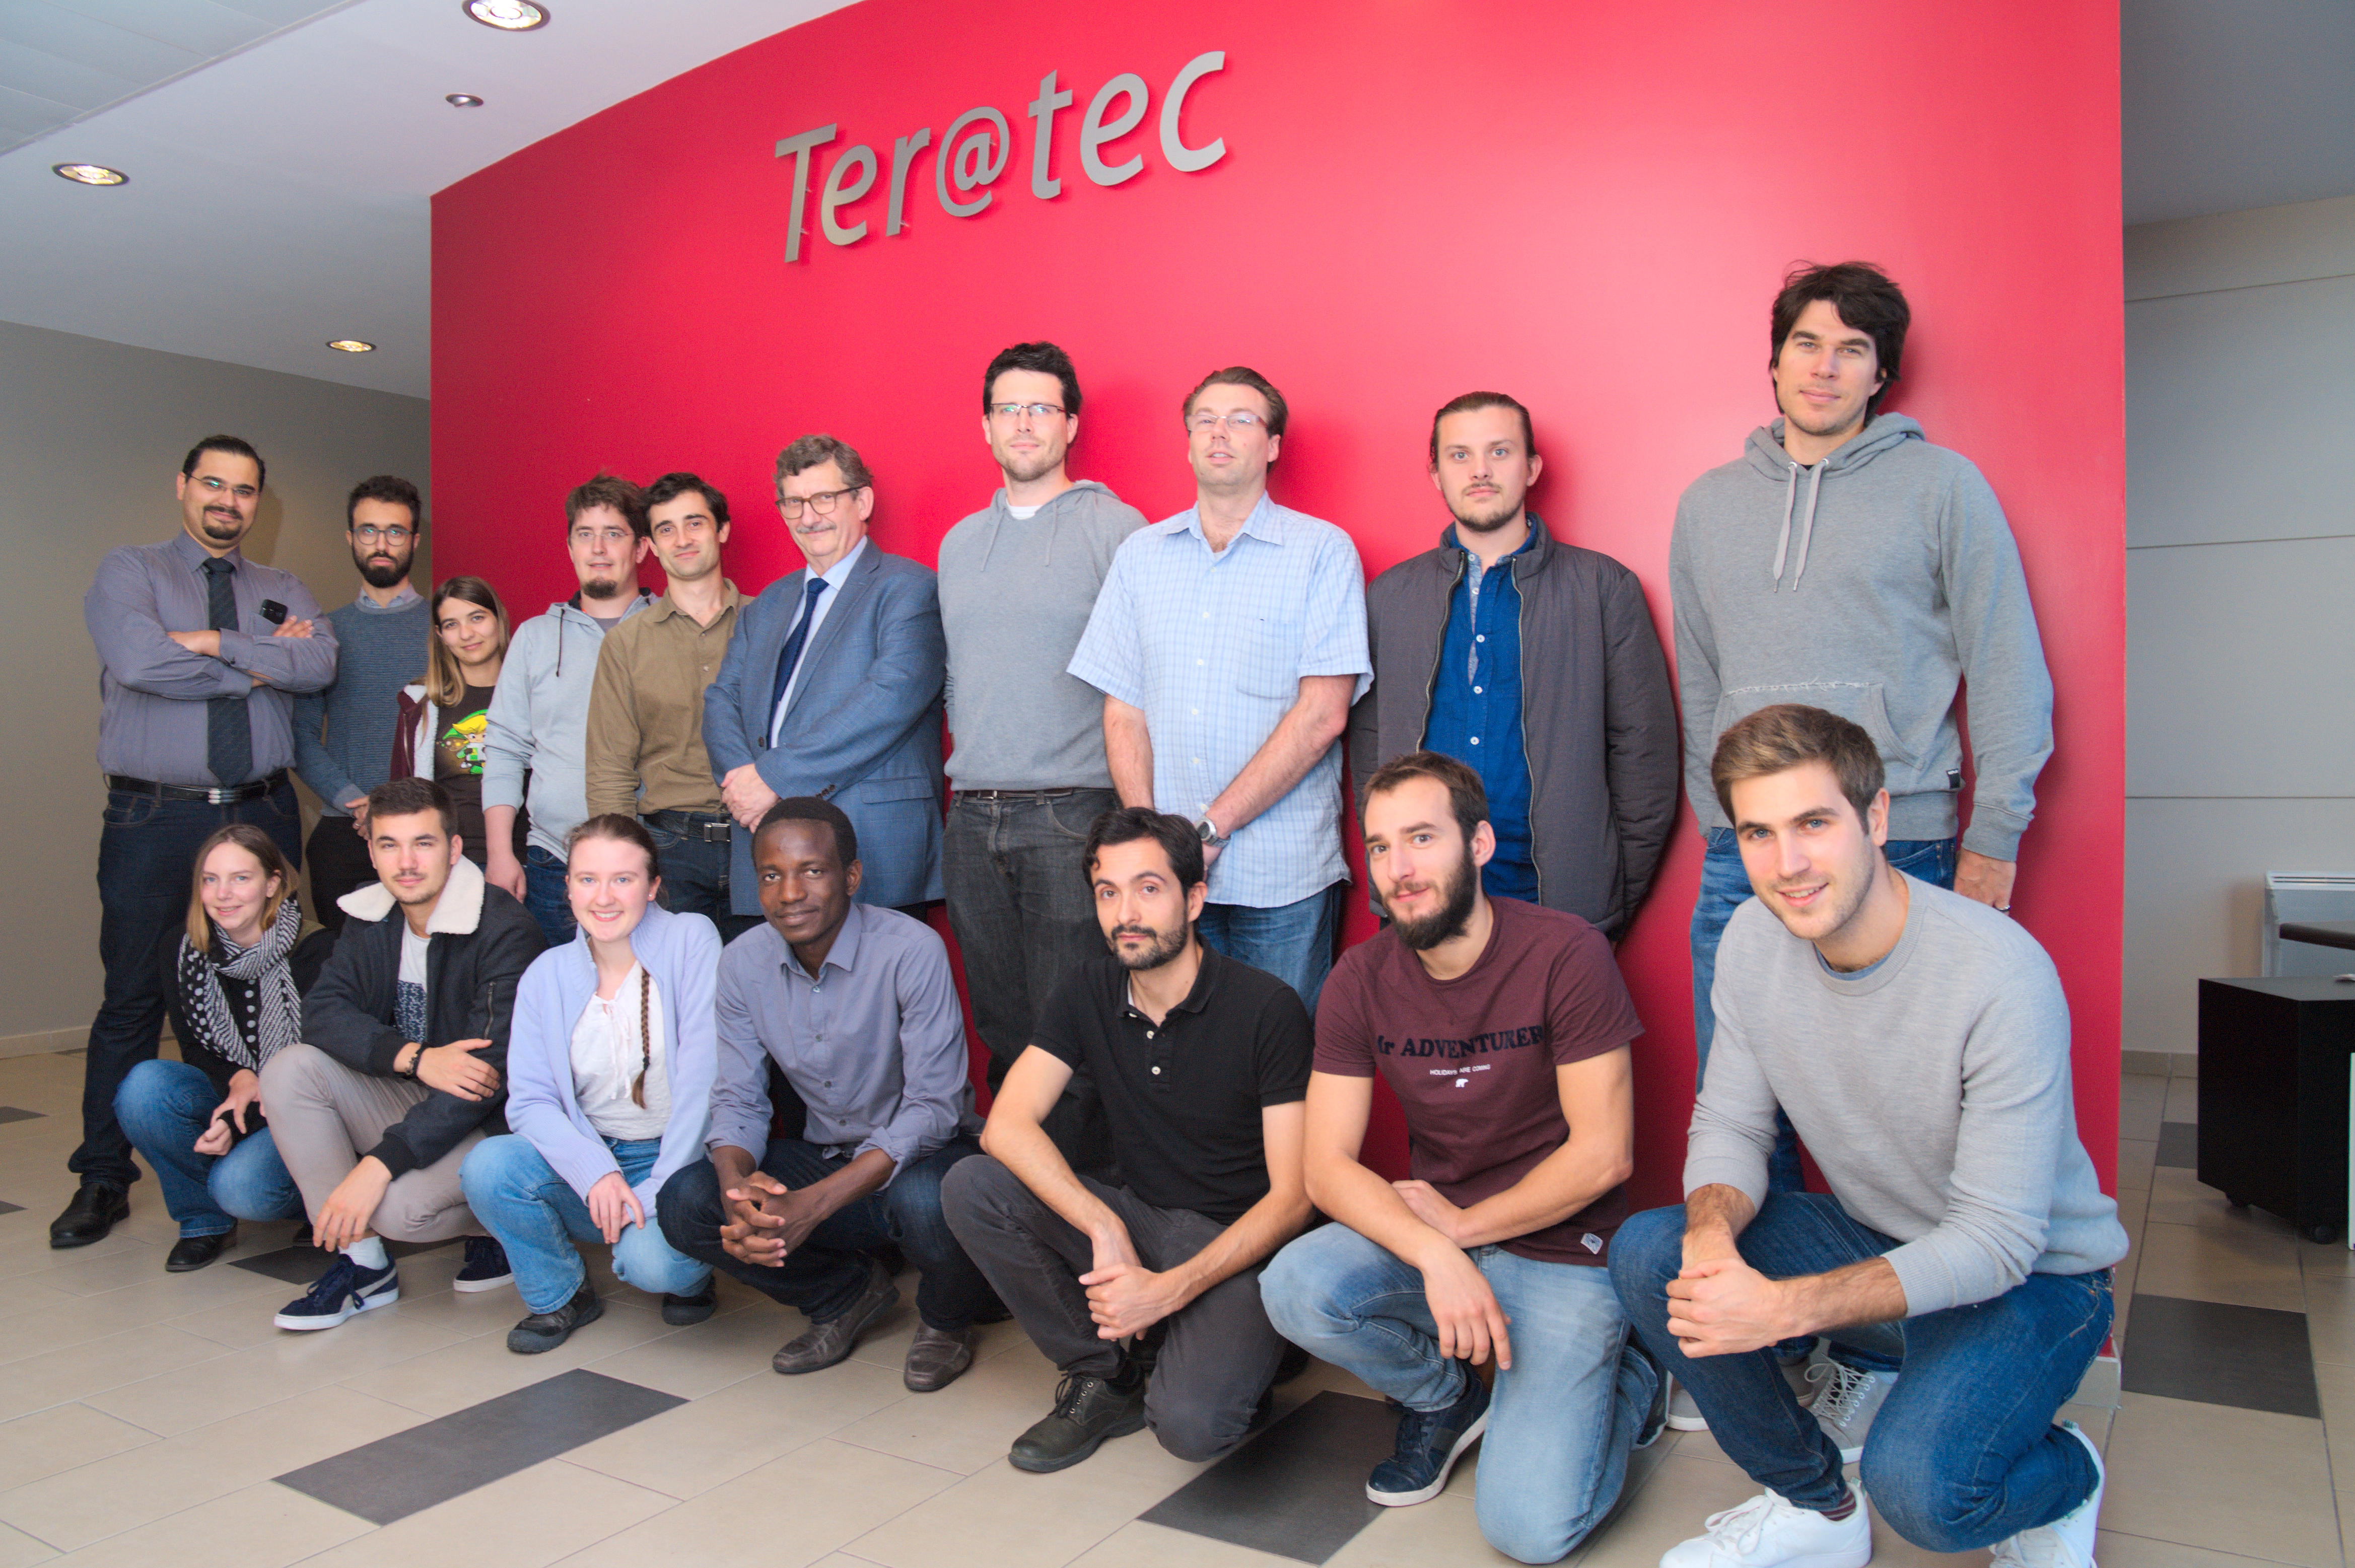 TW26@Teratec attendees